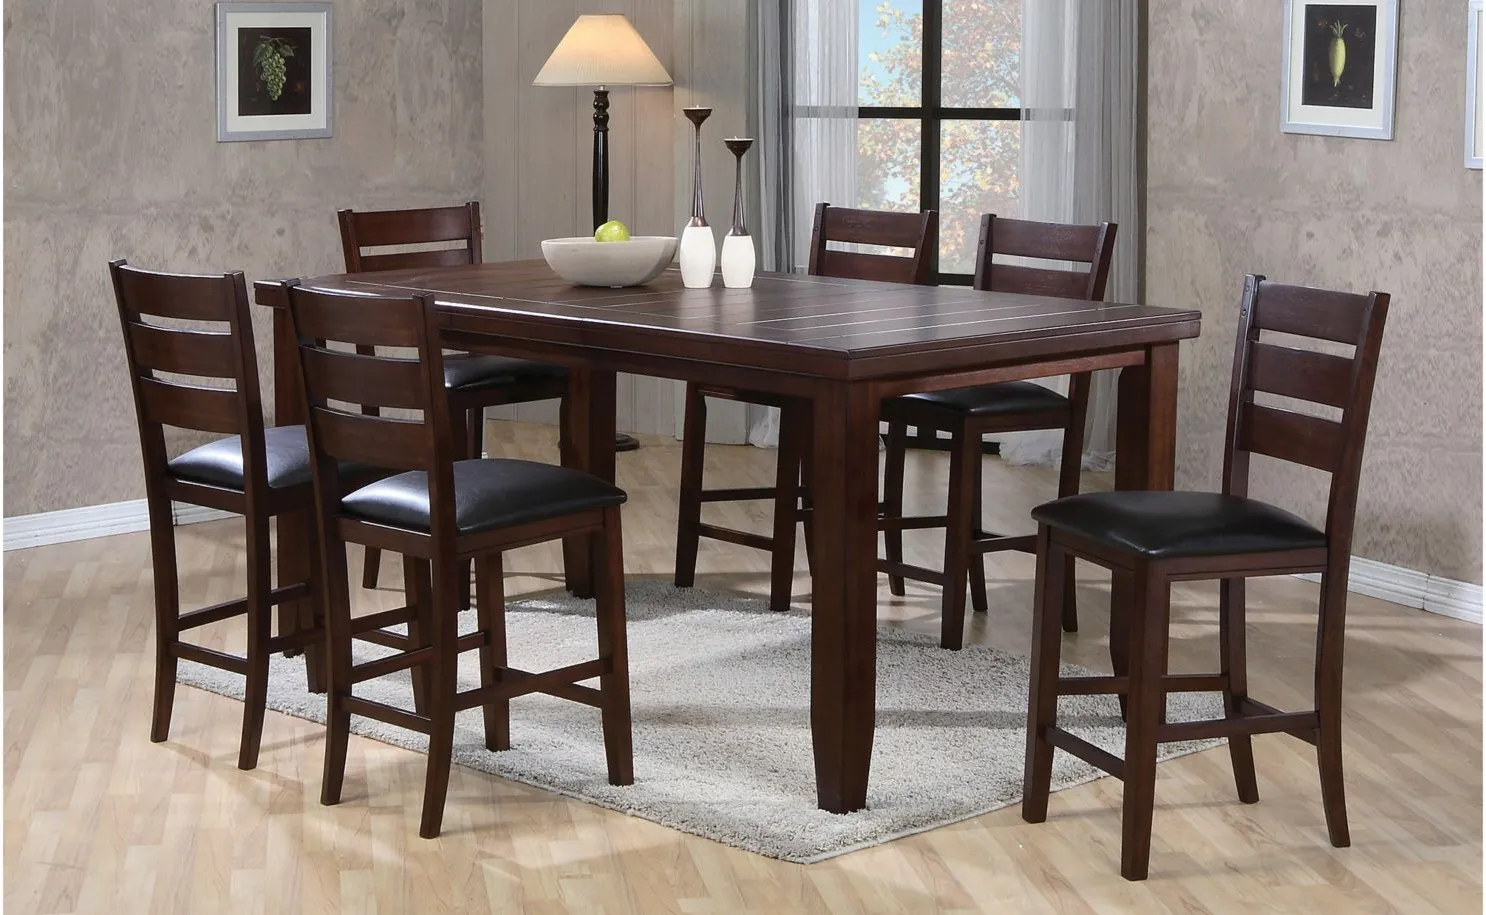 Bardstown 7-pc. Counter-Height Dining Set in Oak / Espresso by Crown Mark